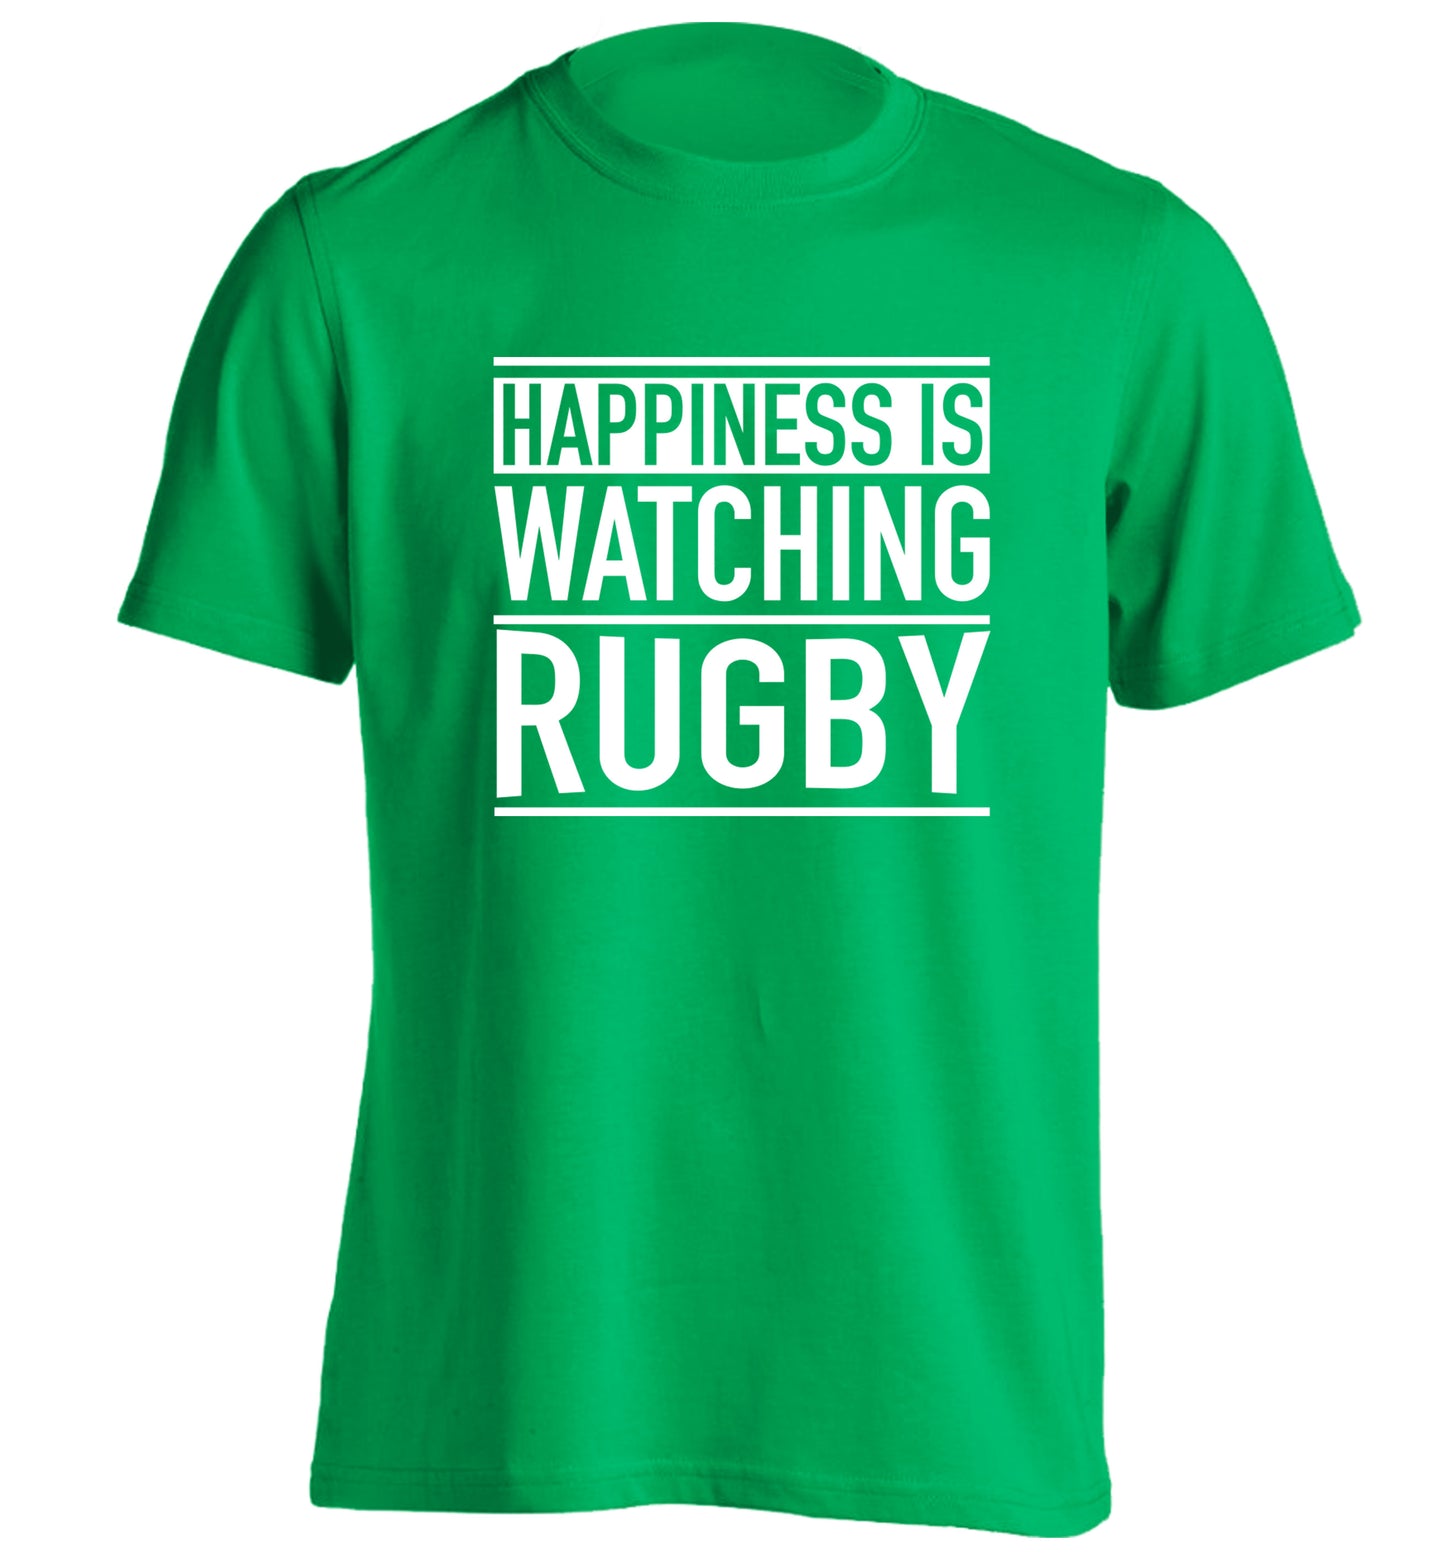 Happiness is watching rugby adults unisex green Tshirt 2XL